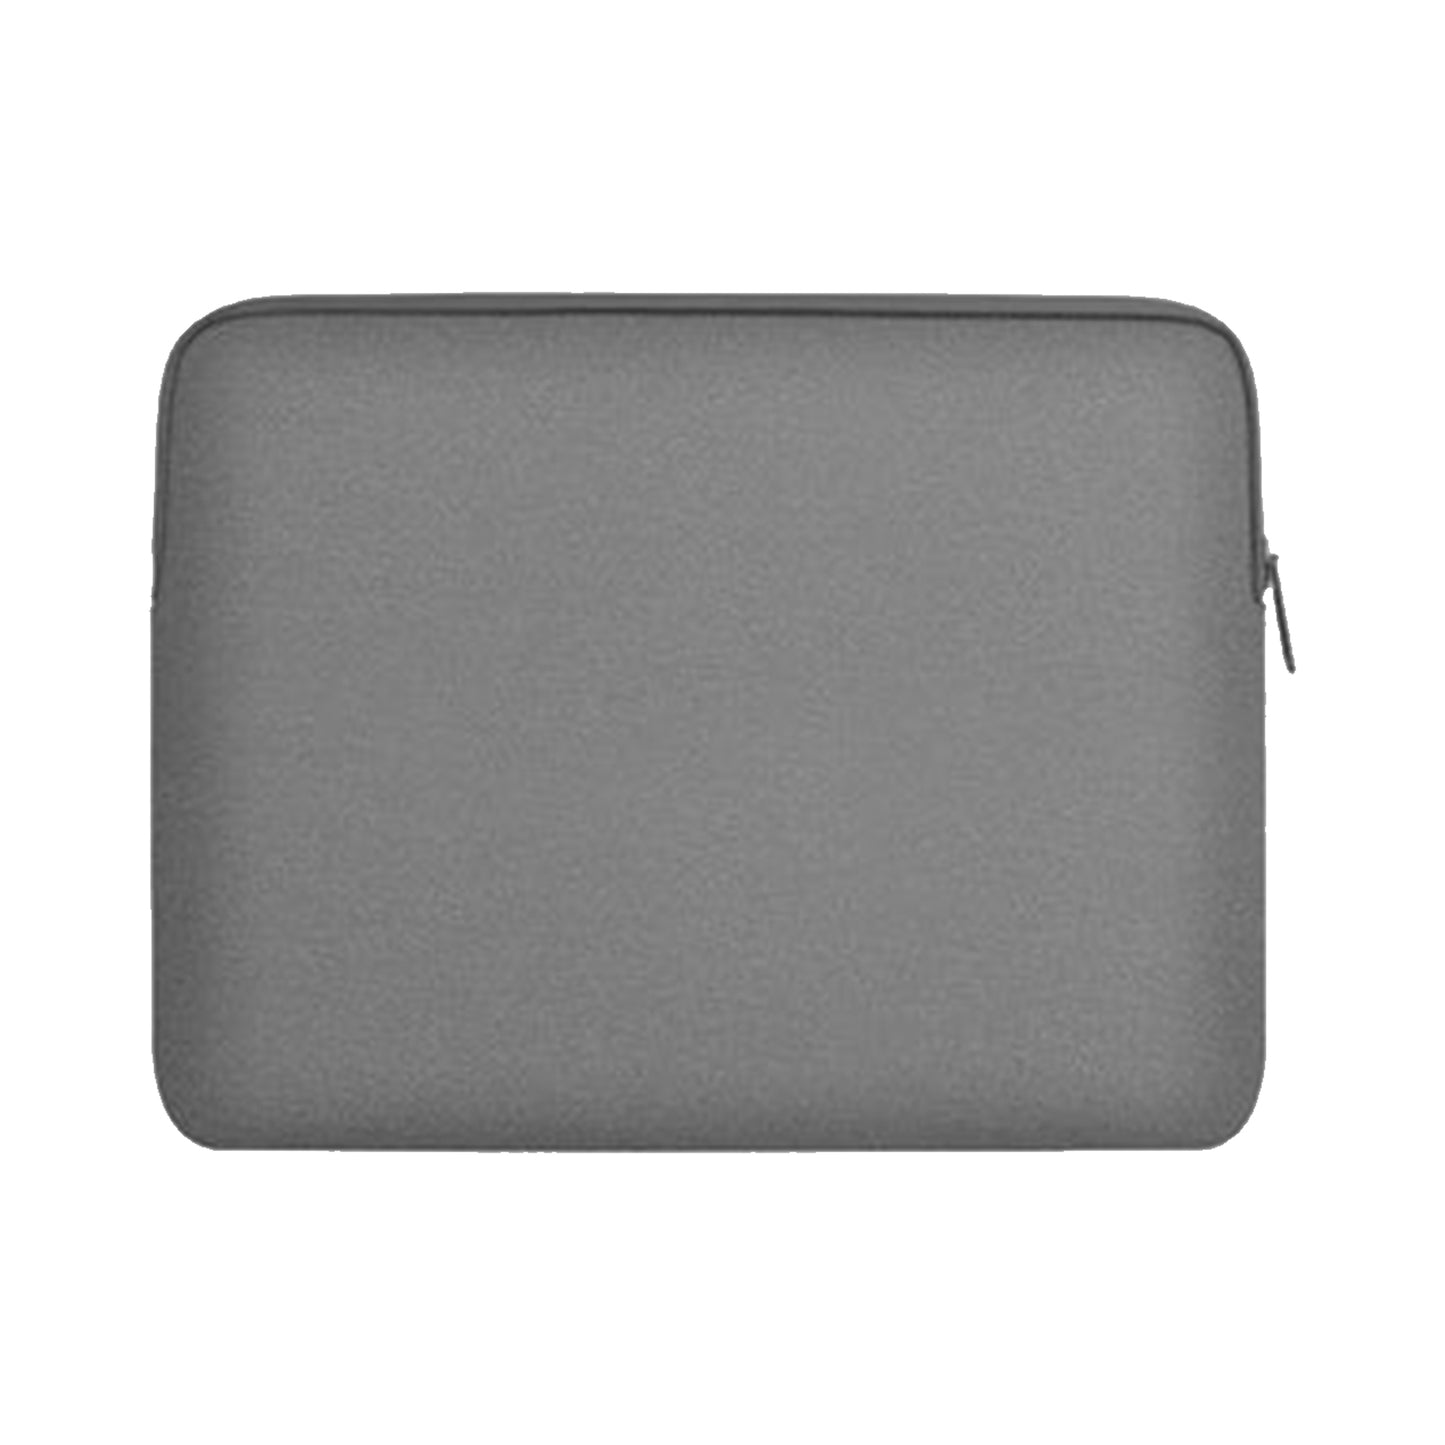 UNIQ Cyprus Laptop and Tablet Sleeve - Water Resistant Neoprene Up to 14" - 14 inch - Marl Grey ( Barcode: 8886463680742 )